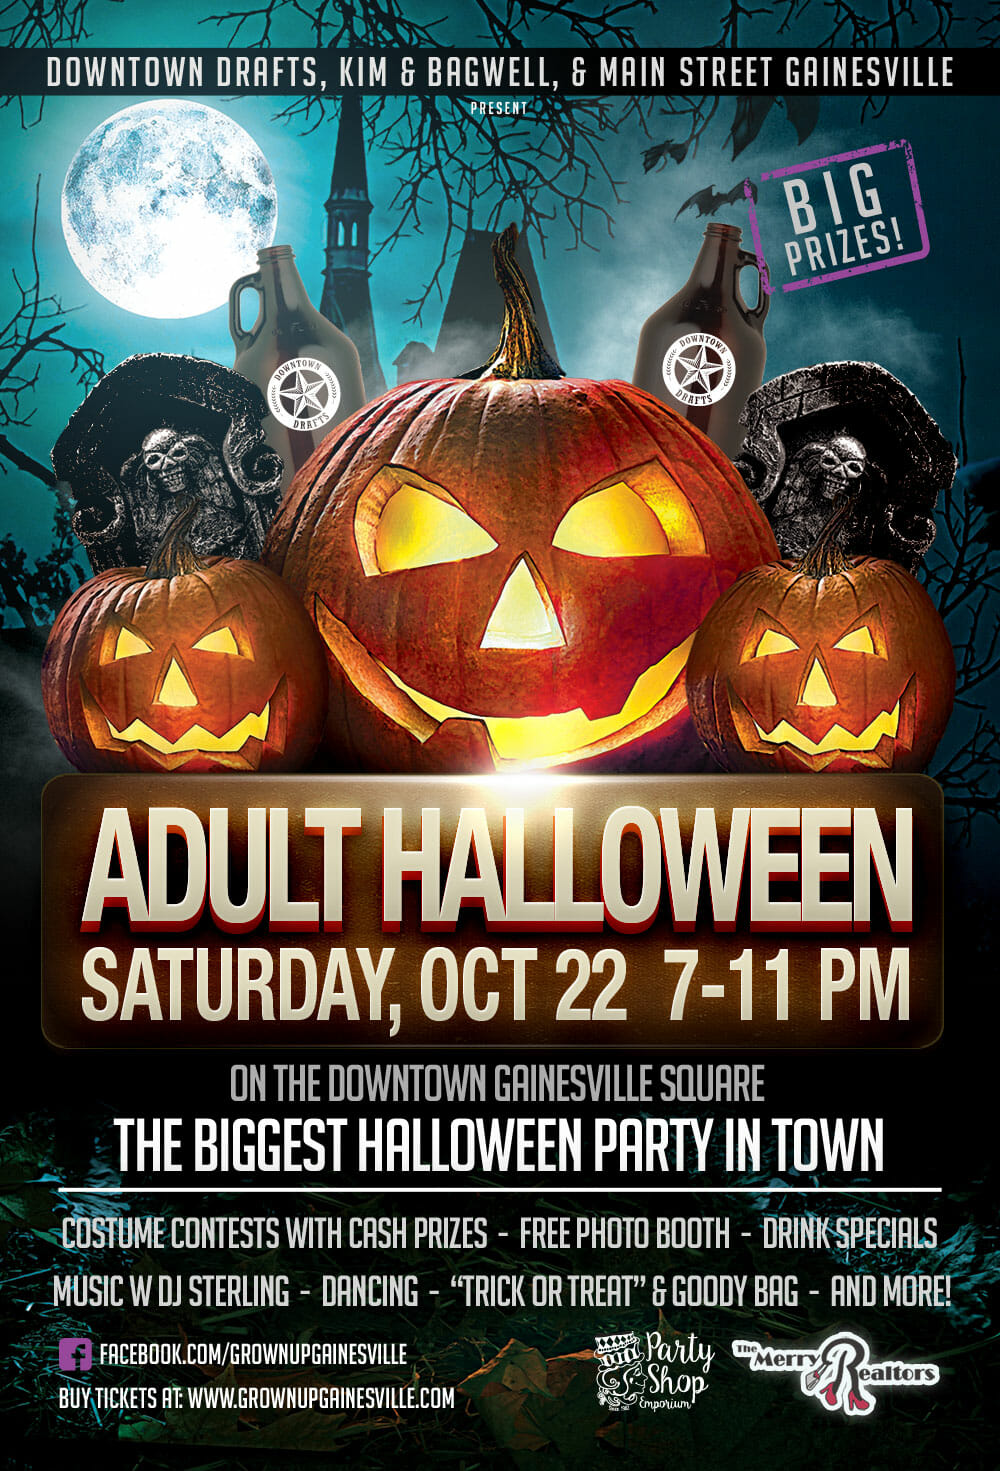 Gainesville Adult Halloween – Downtown Drafts